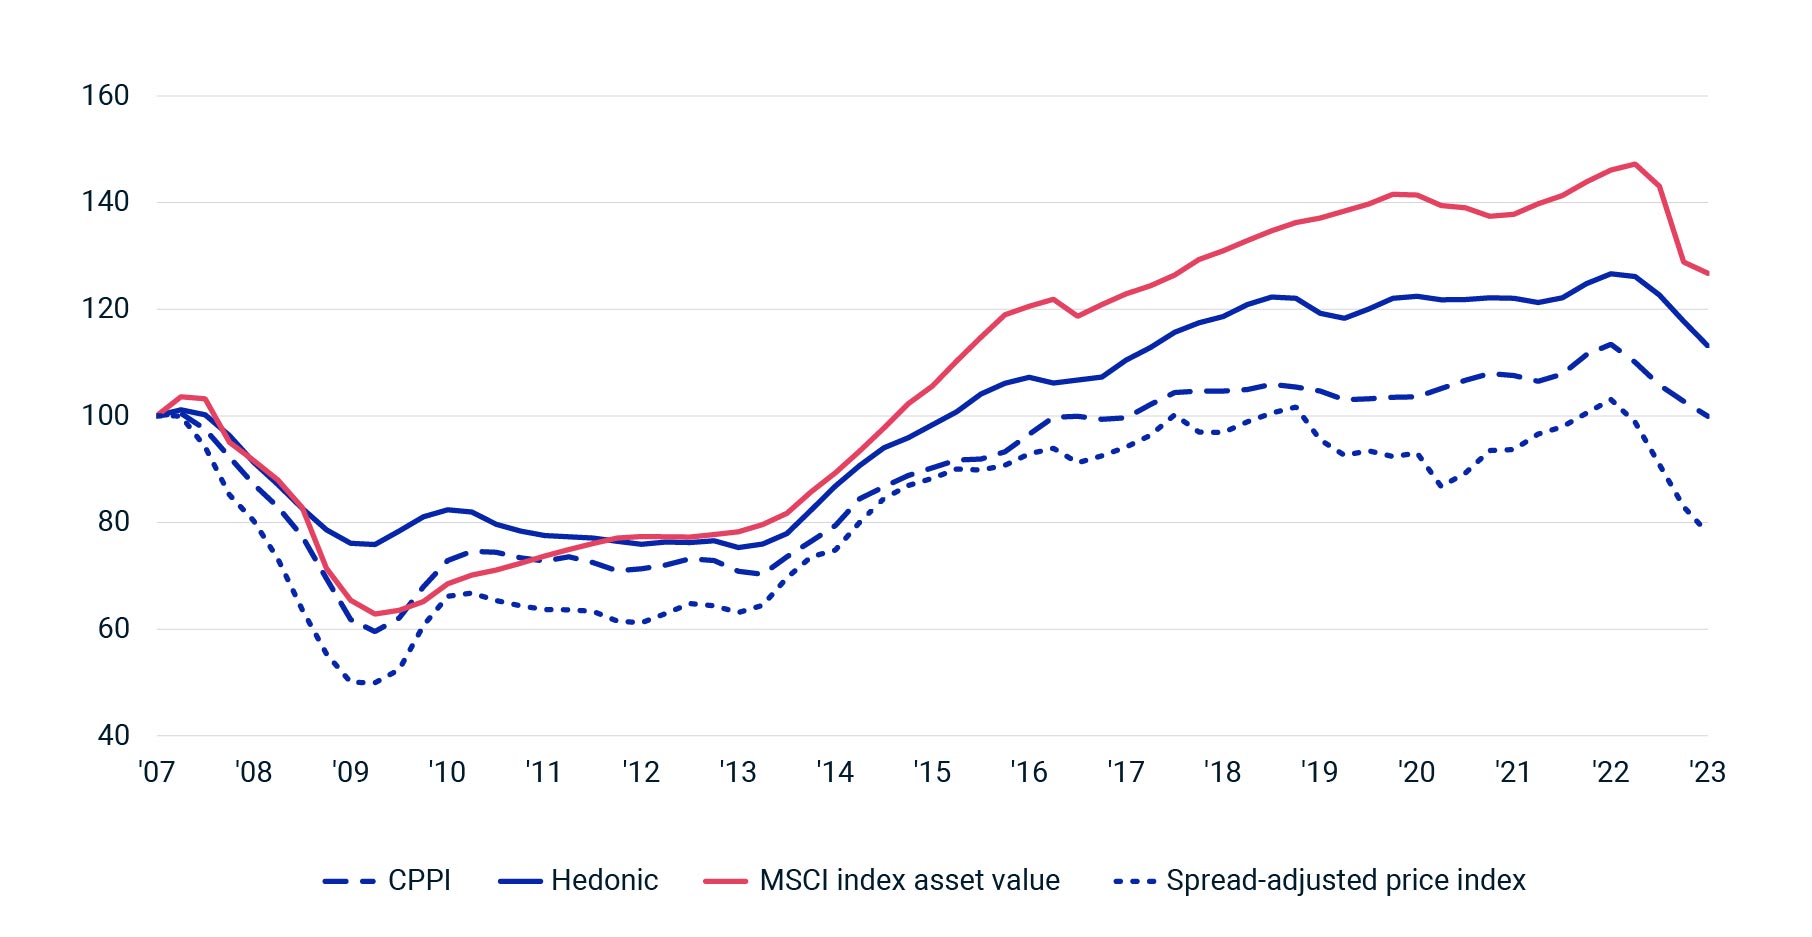 This line graph shows trends in CPPI, hedonic pricing, liquidity-adjusted price index and asset values, indexed to 2007. All levels have fallen in recent quarters.  